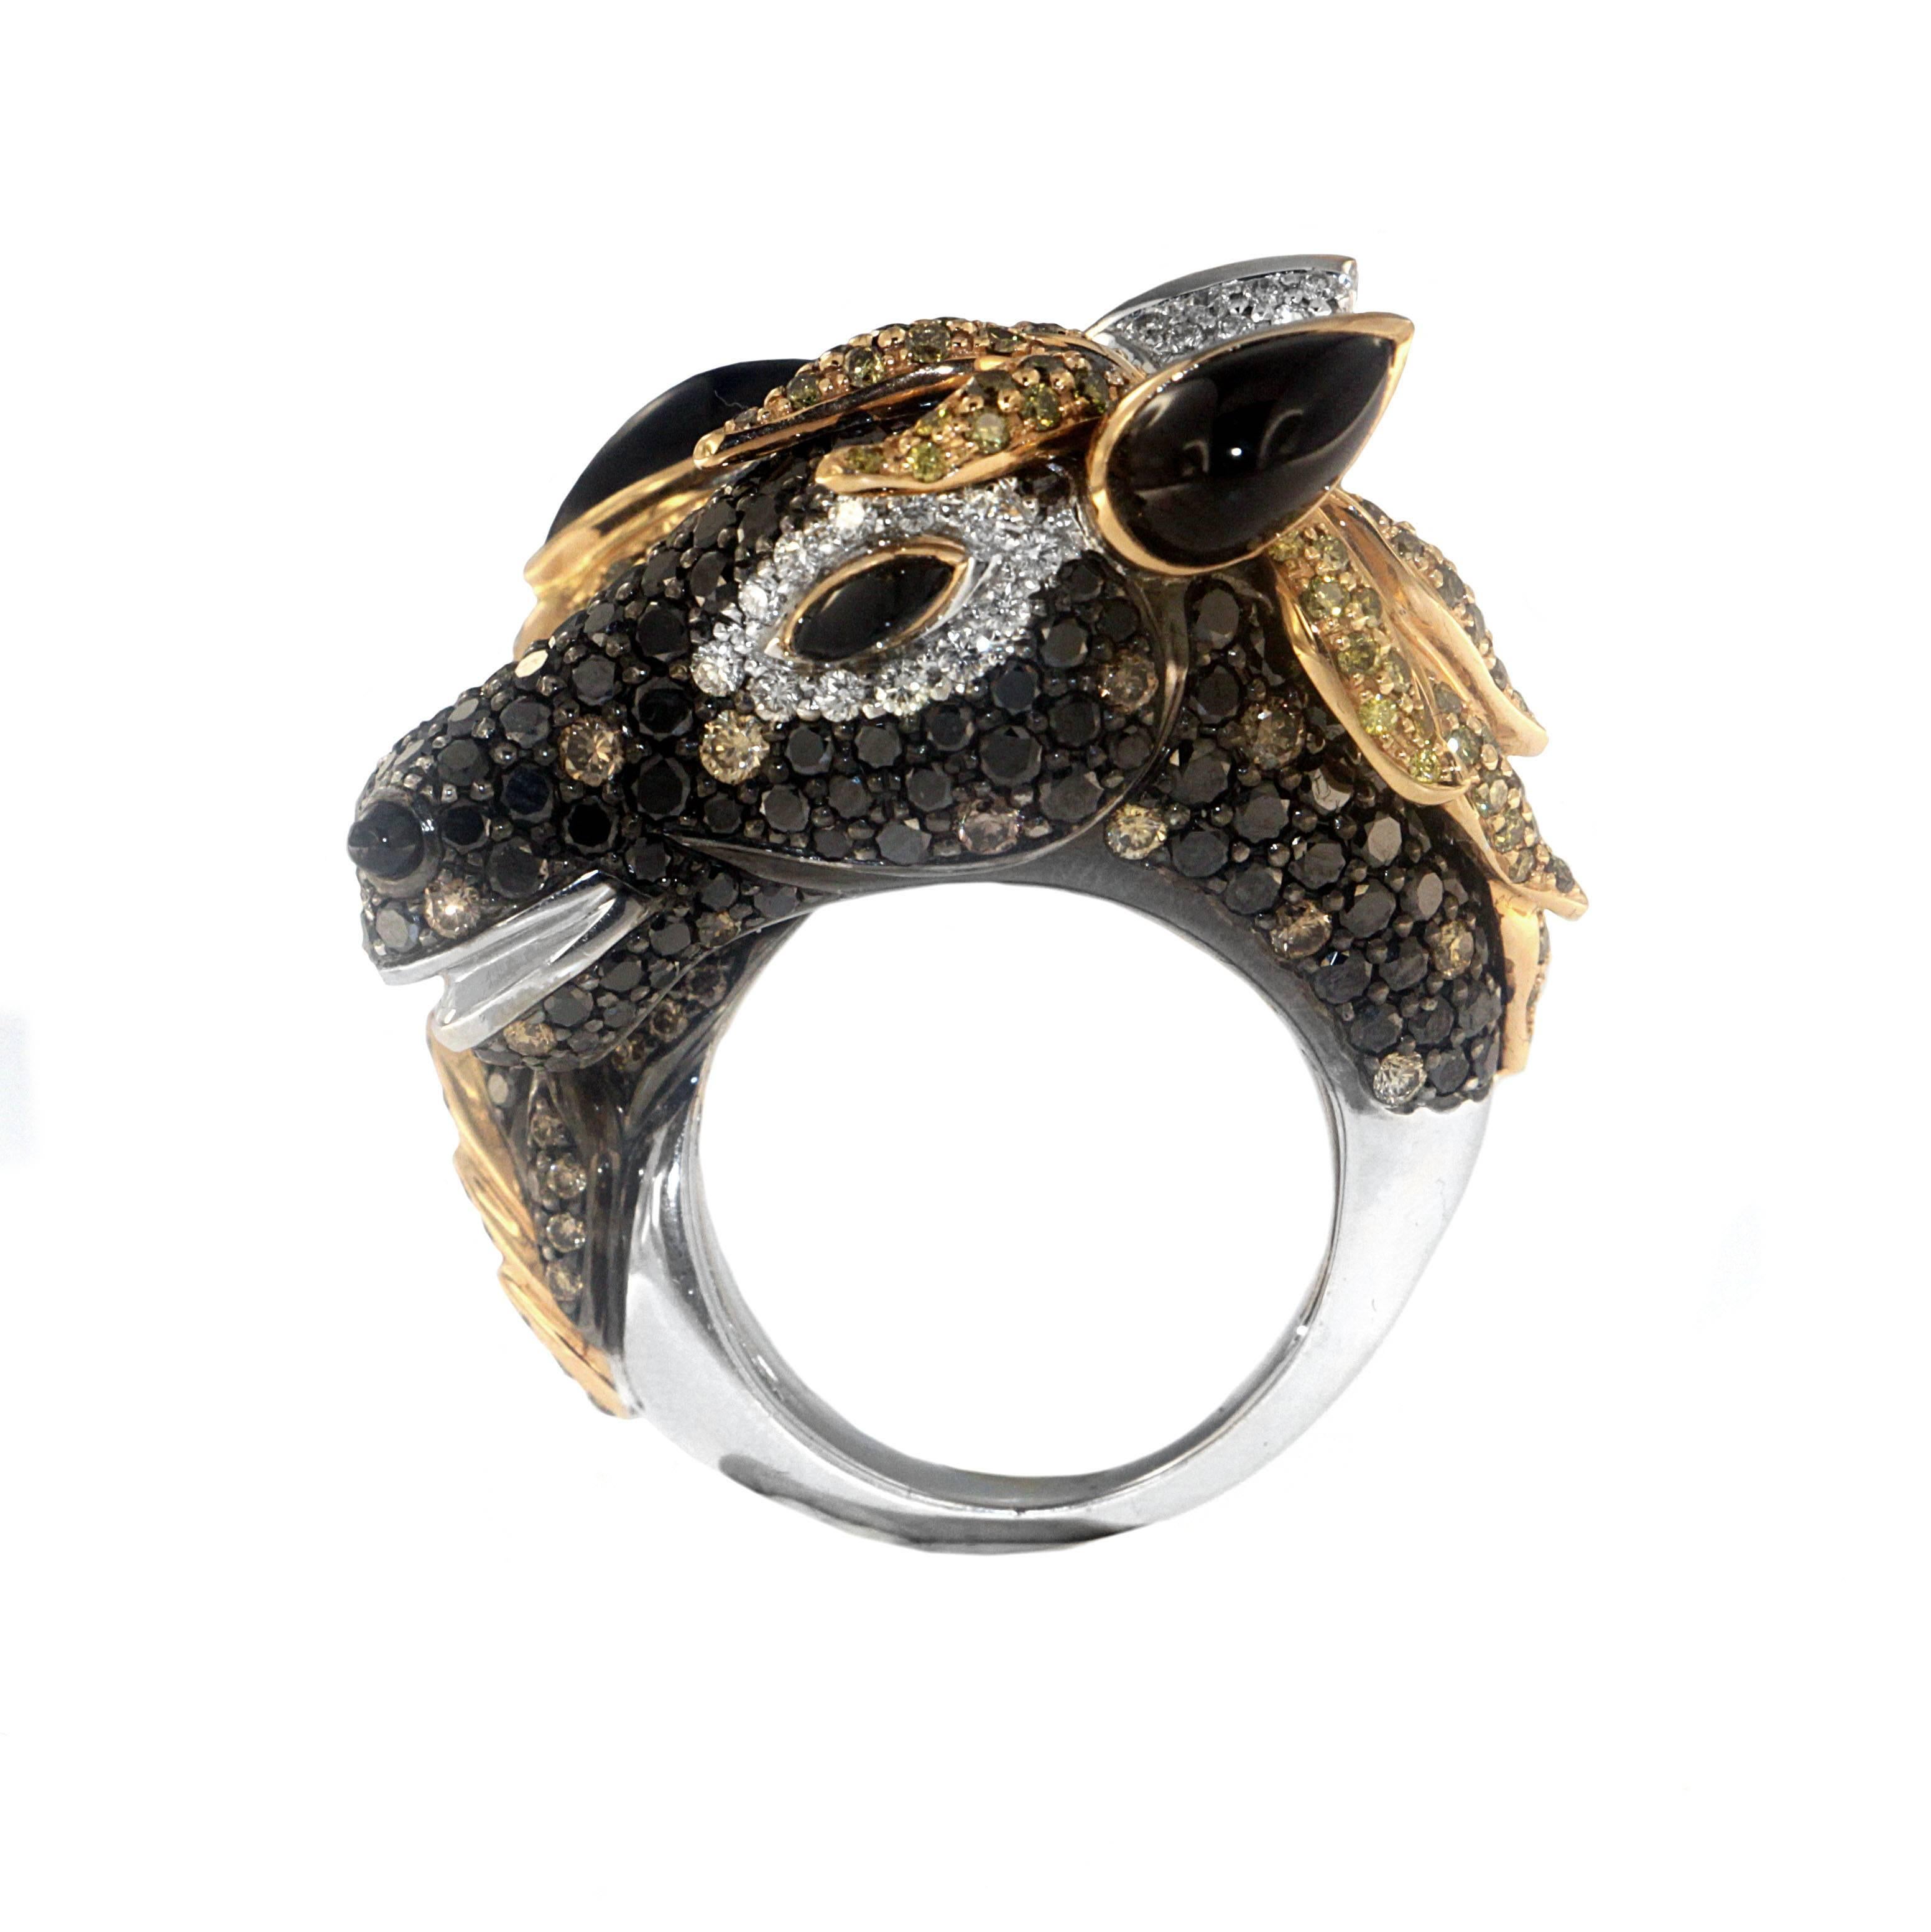 Are You ready for the Derby?

This graceful horse is sure to dash itself into your heart. This ring consists of Black, Brown, Yellow, and White Diamonds with an overall of 7.51 carats, and is a mixture of 18K Gold & Palladium with a great design